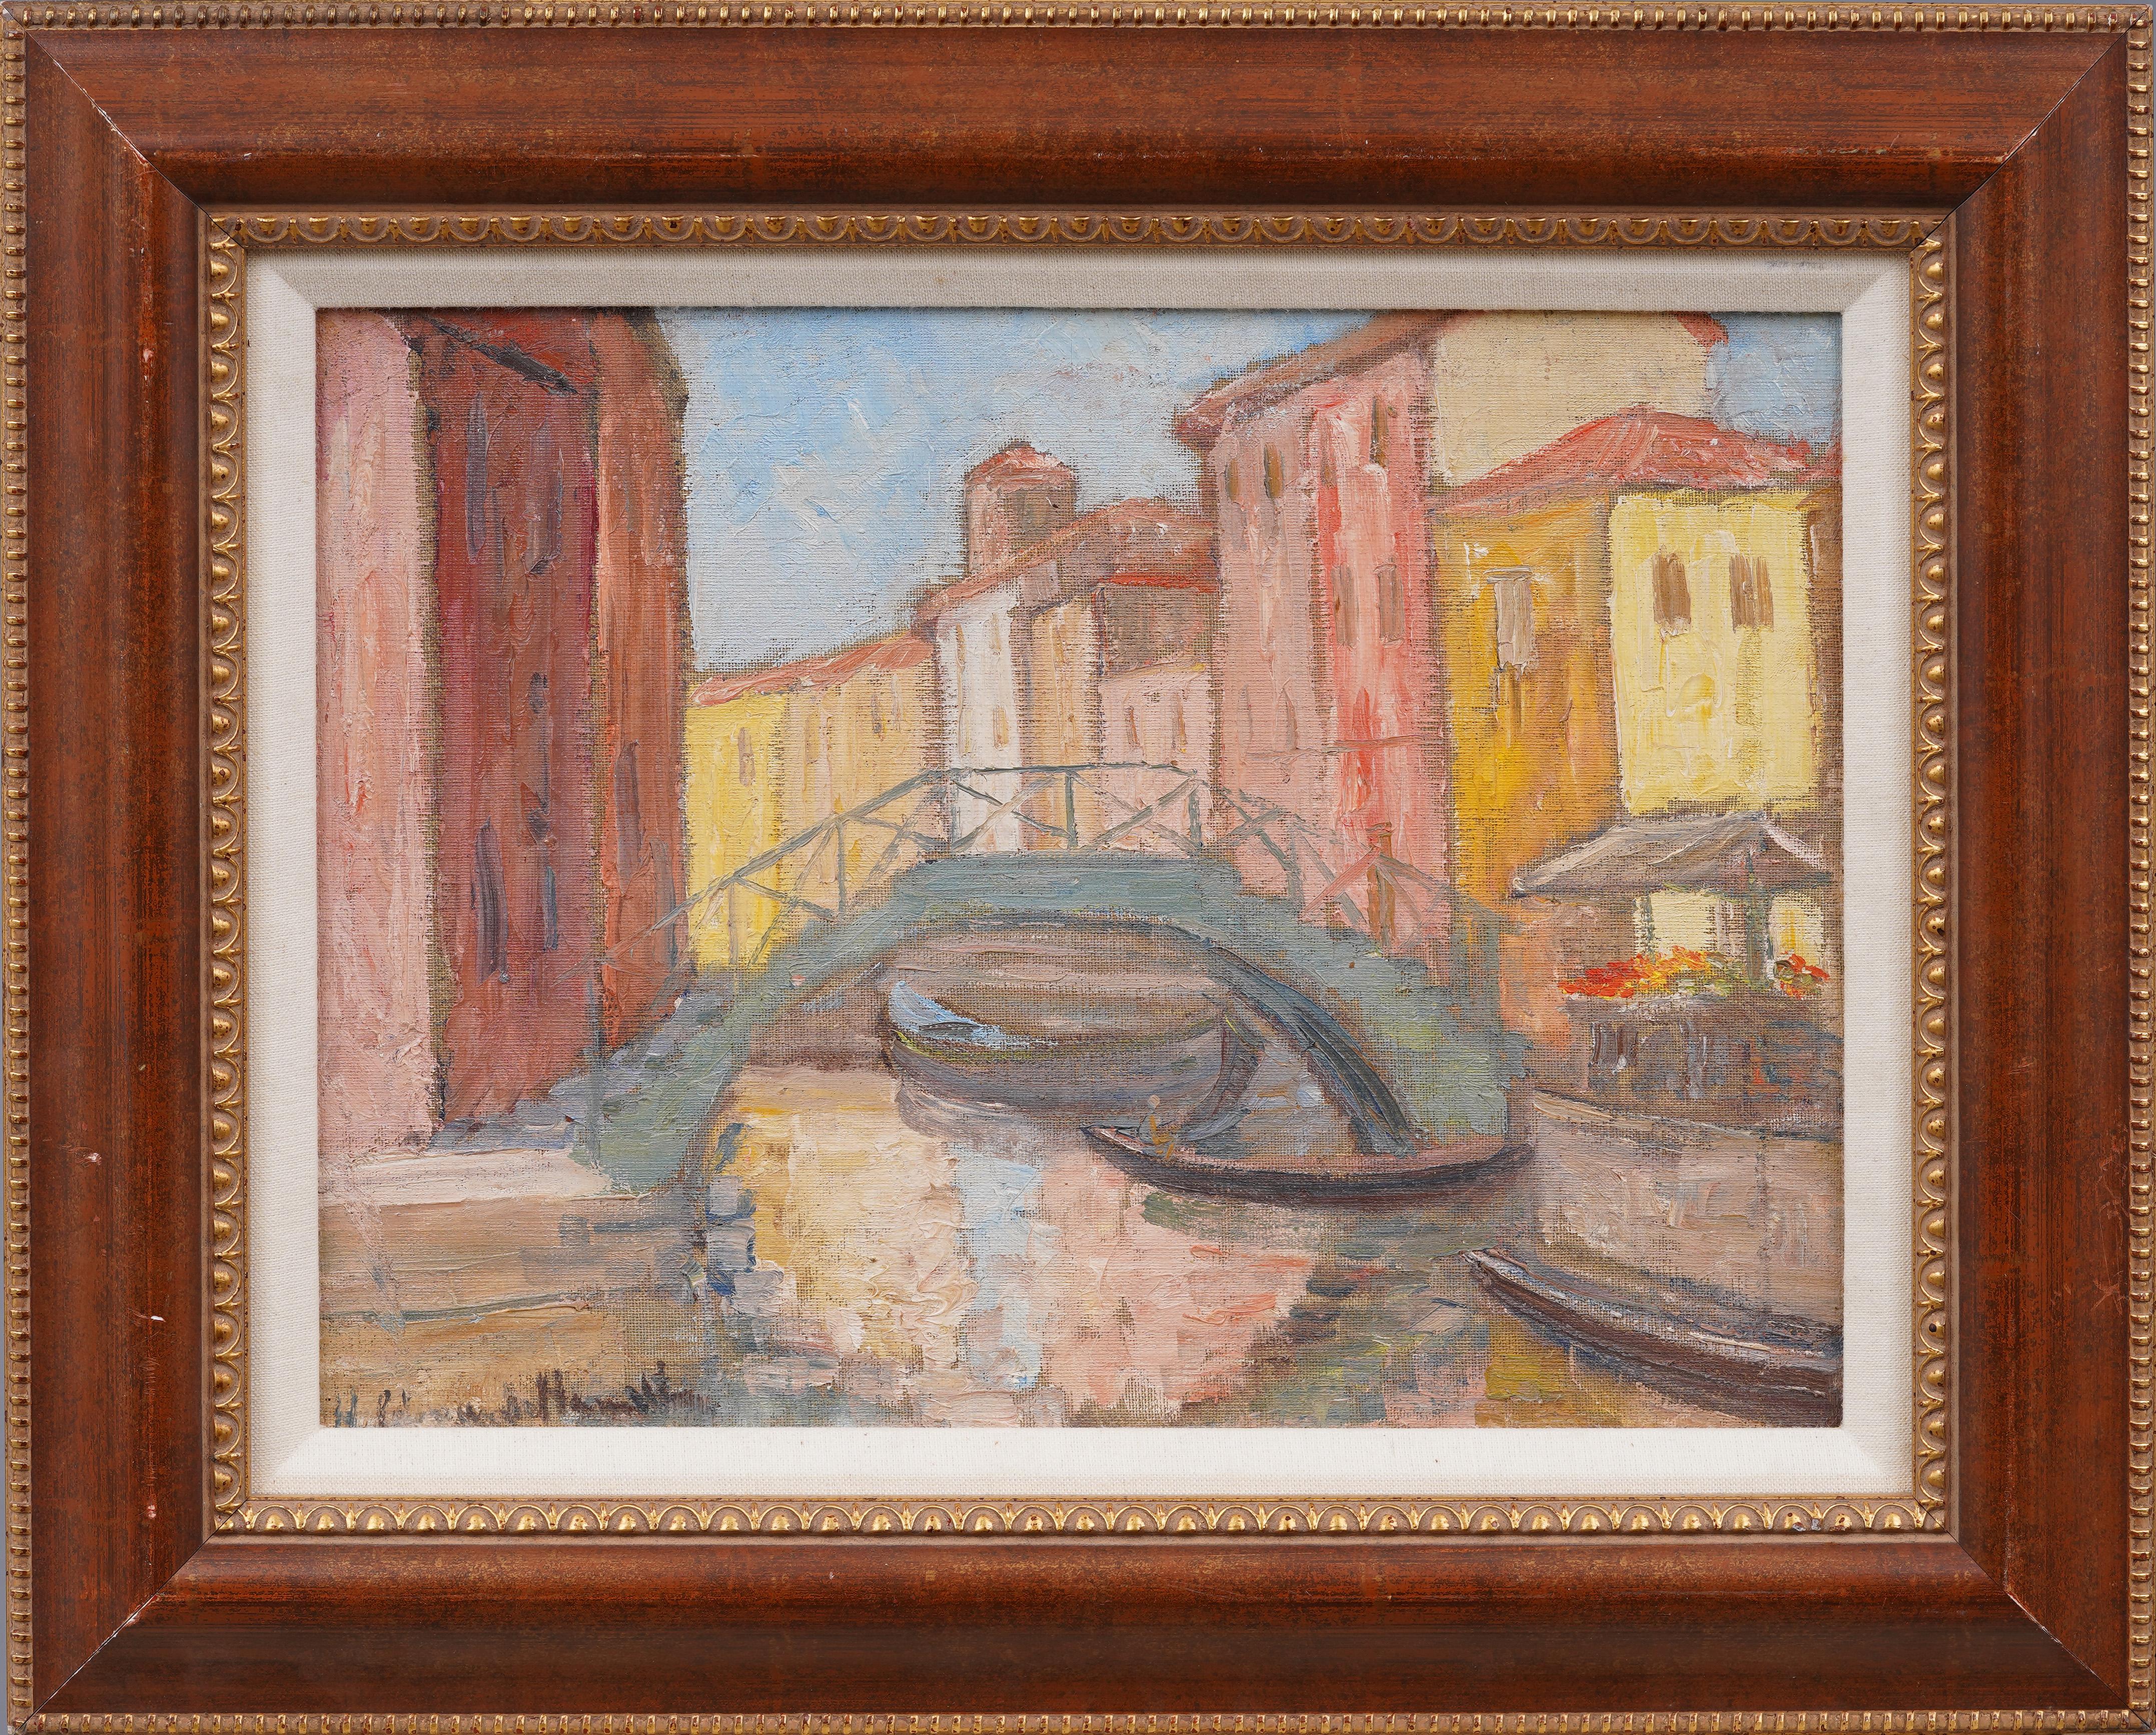 Nicely painted impressionist view of Burano, Italy by Hildegarde Hume Hamilton (1898 - 1970).  Oil on canvas.  Framed.  Signed.  

Artist Bio:

Hildegard Hume Hamilton
(1898 – 1970)
 
Hildegard Hume Hamilton was born in Syracuse, New York, in 1898.